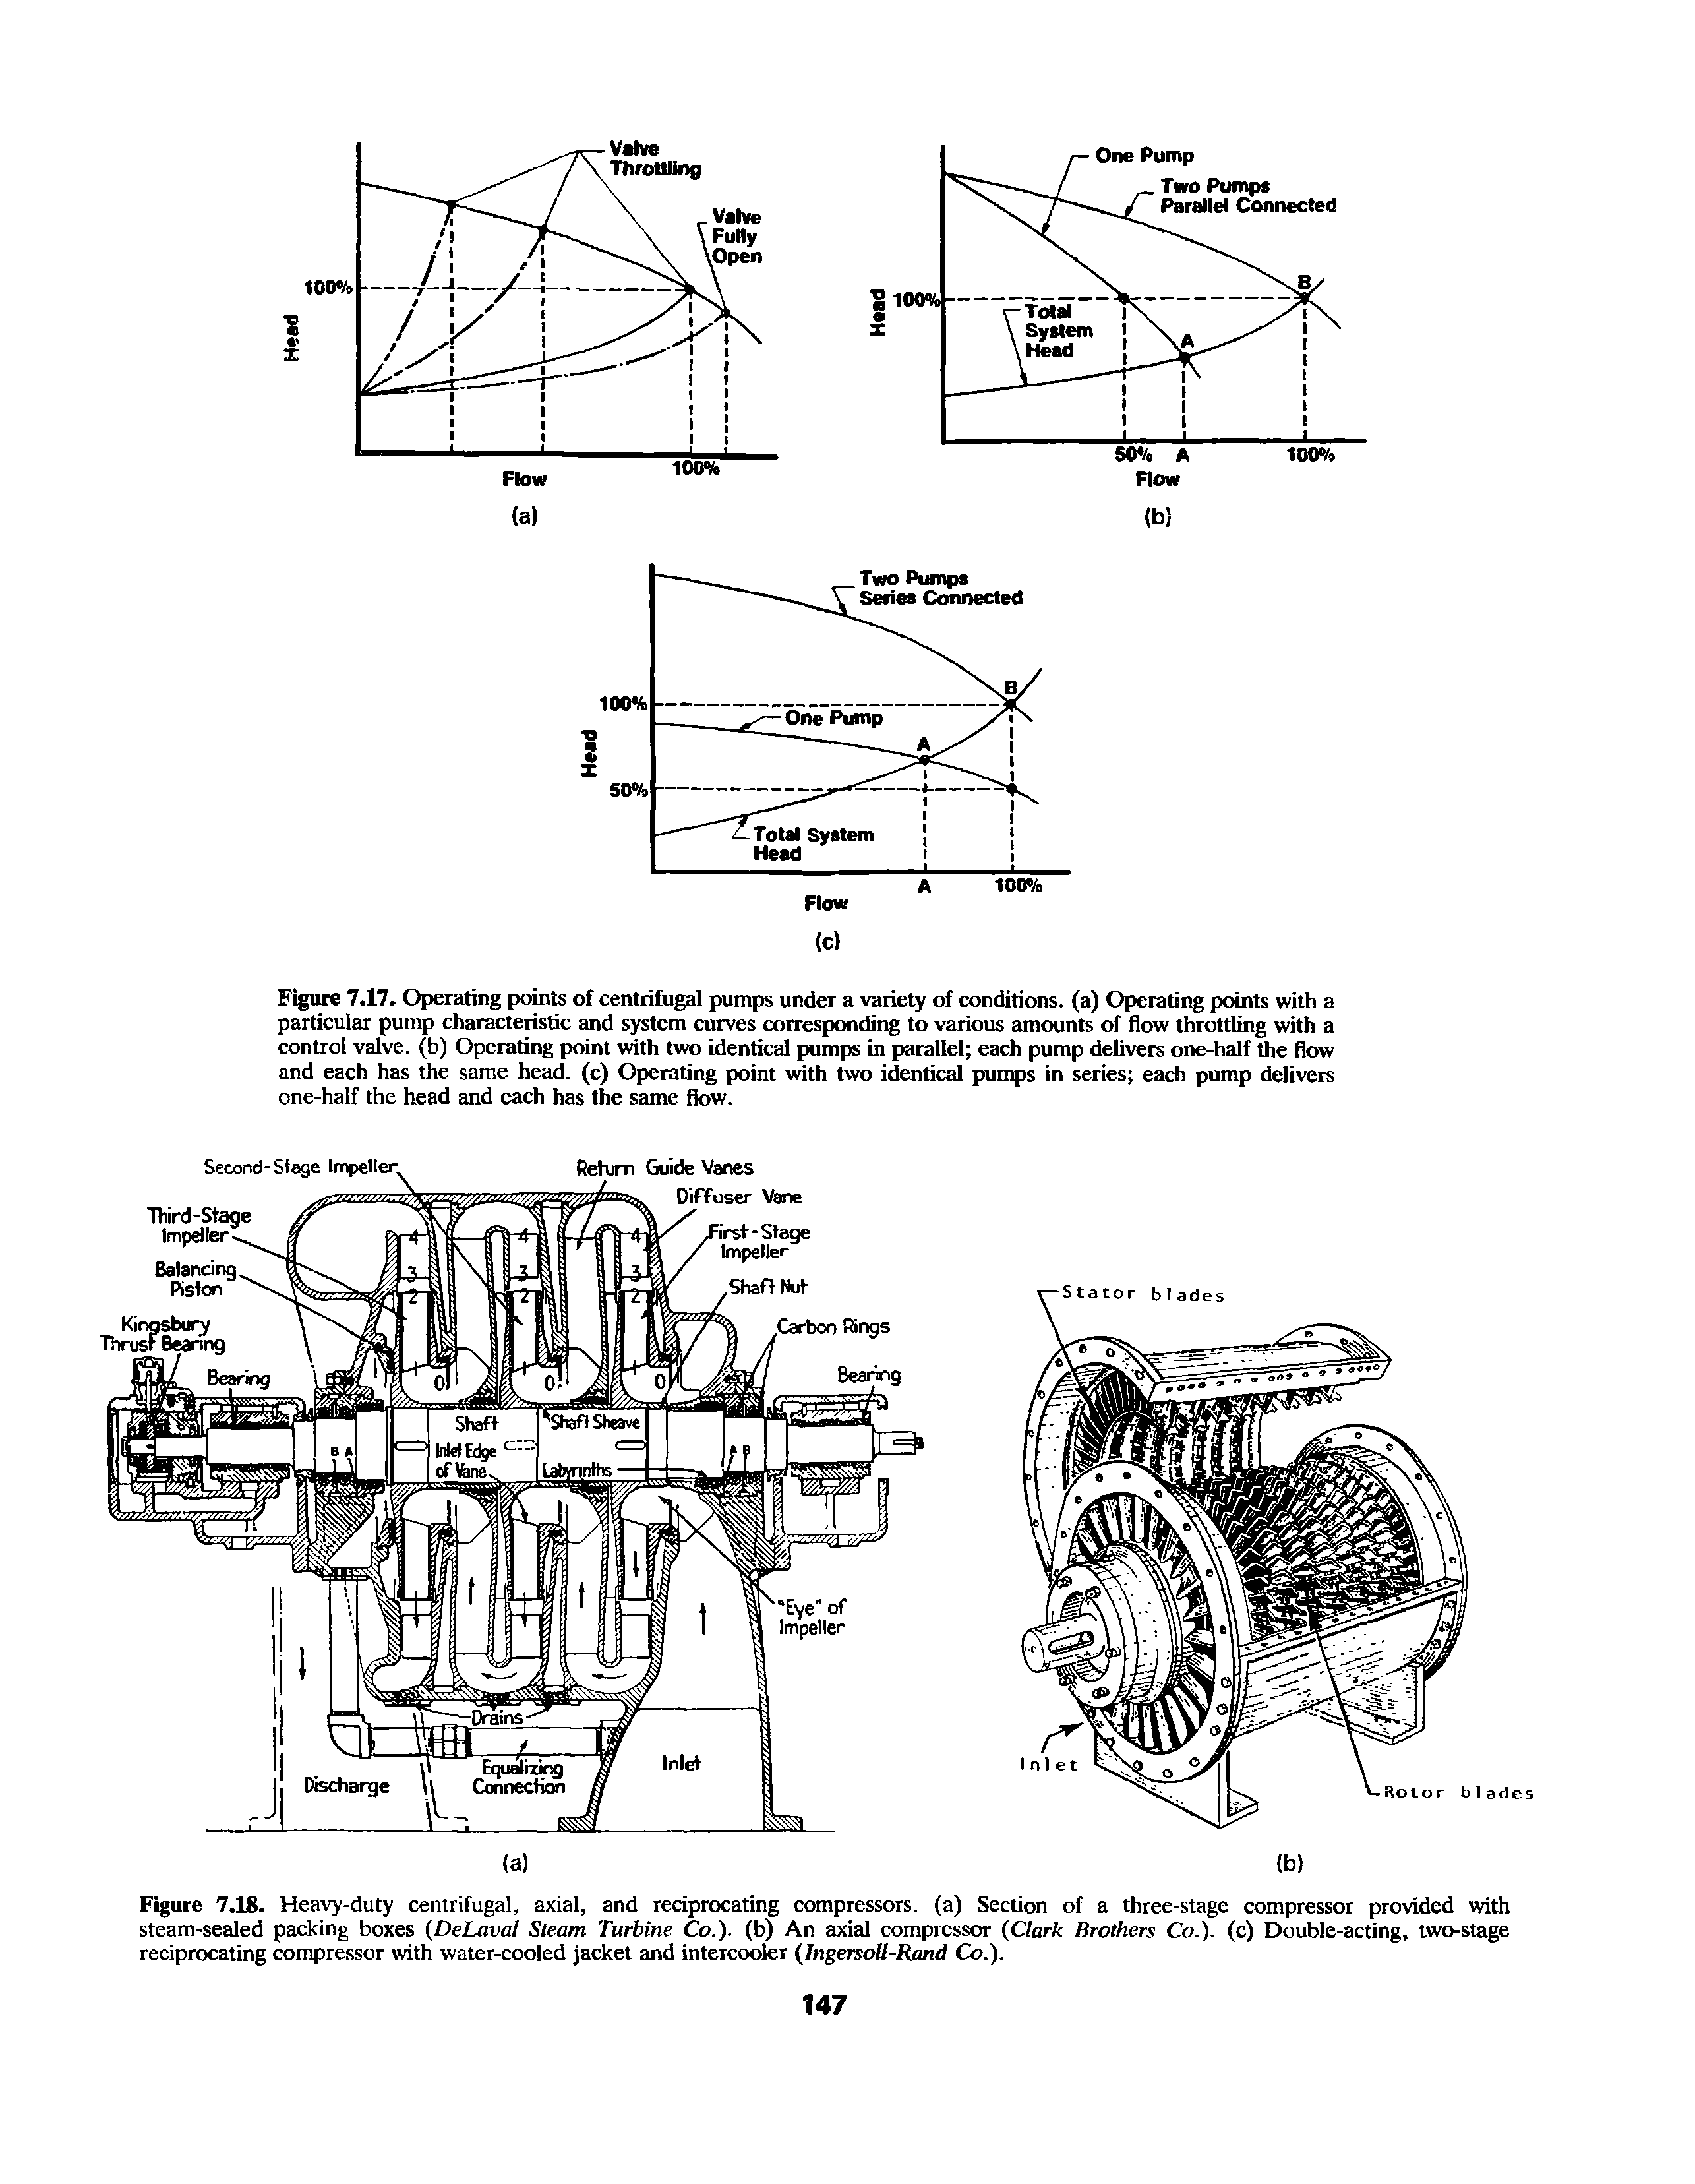 Figure 7.17. Operating points of centrifugal pumps under a variety of conditions, (a) Operating points with a particular pump characteristic and system curves corresponding to various amounts of flow throttling with a control valve, (b) Operating point with two identical pumps in parallel each pump delivers one-half the flow and each has the same head, (c) Operating point with two identical pumps in series each pump delivers one-half the head and each has the same flow.